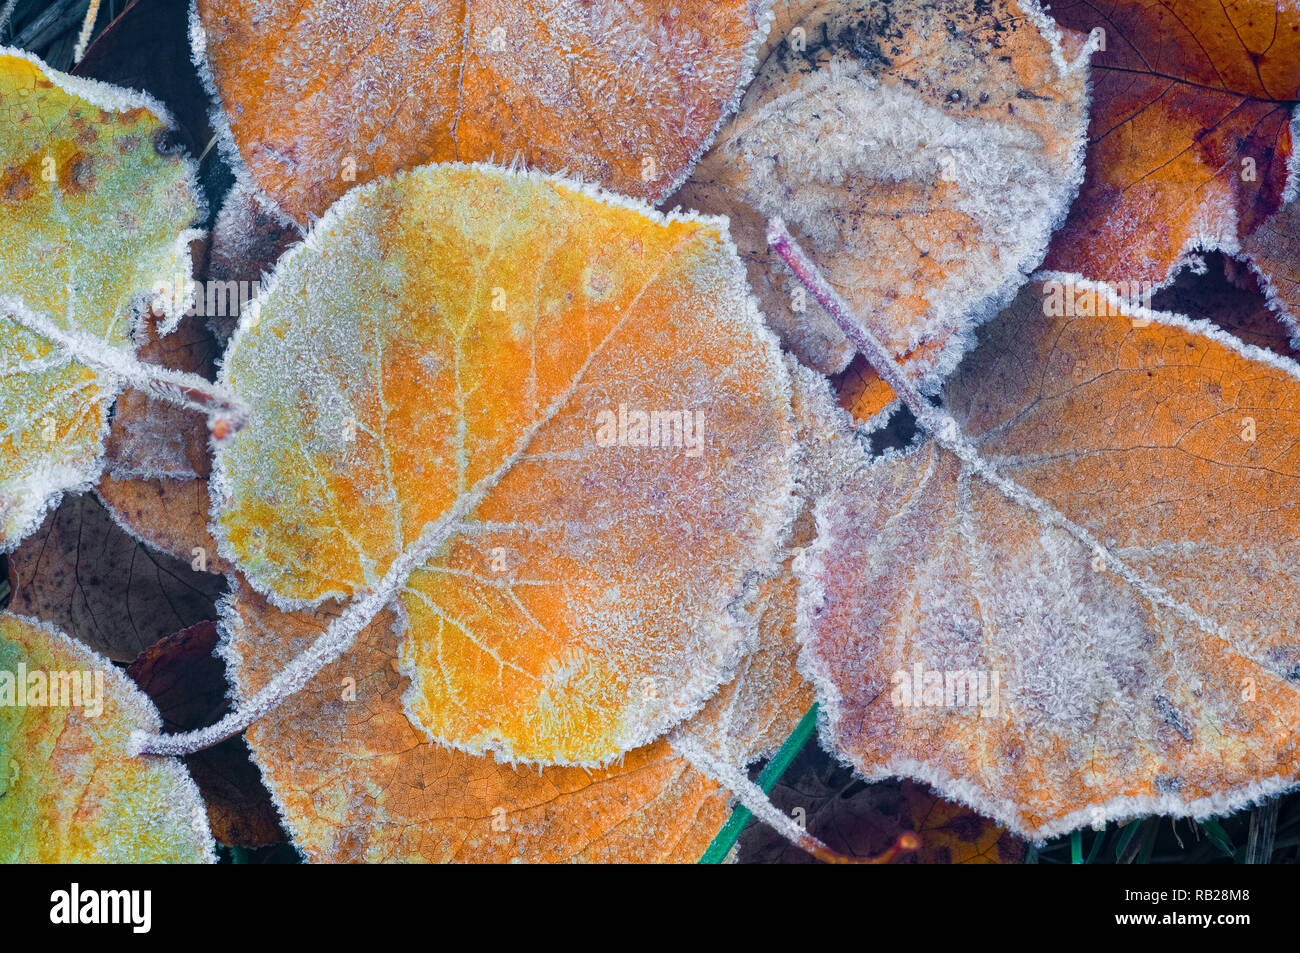 Abstract image of Apricot leaves on the ground during late Autumn, covered in frost. Stock Photo